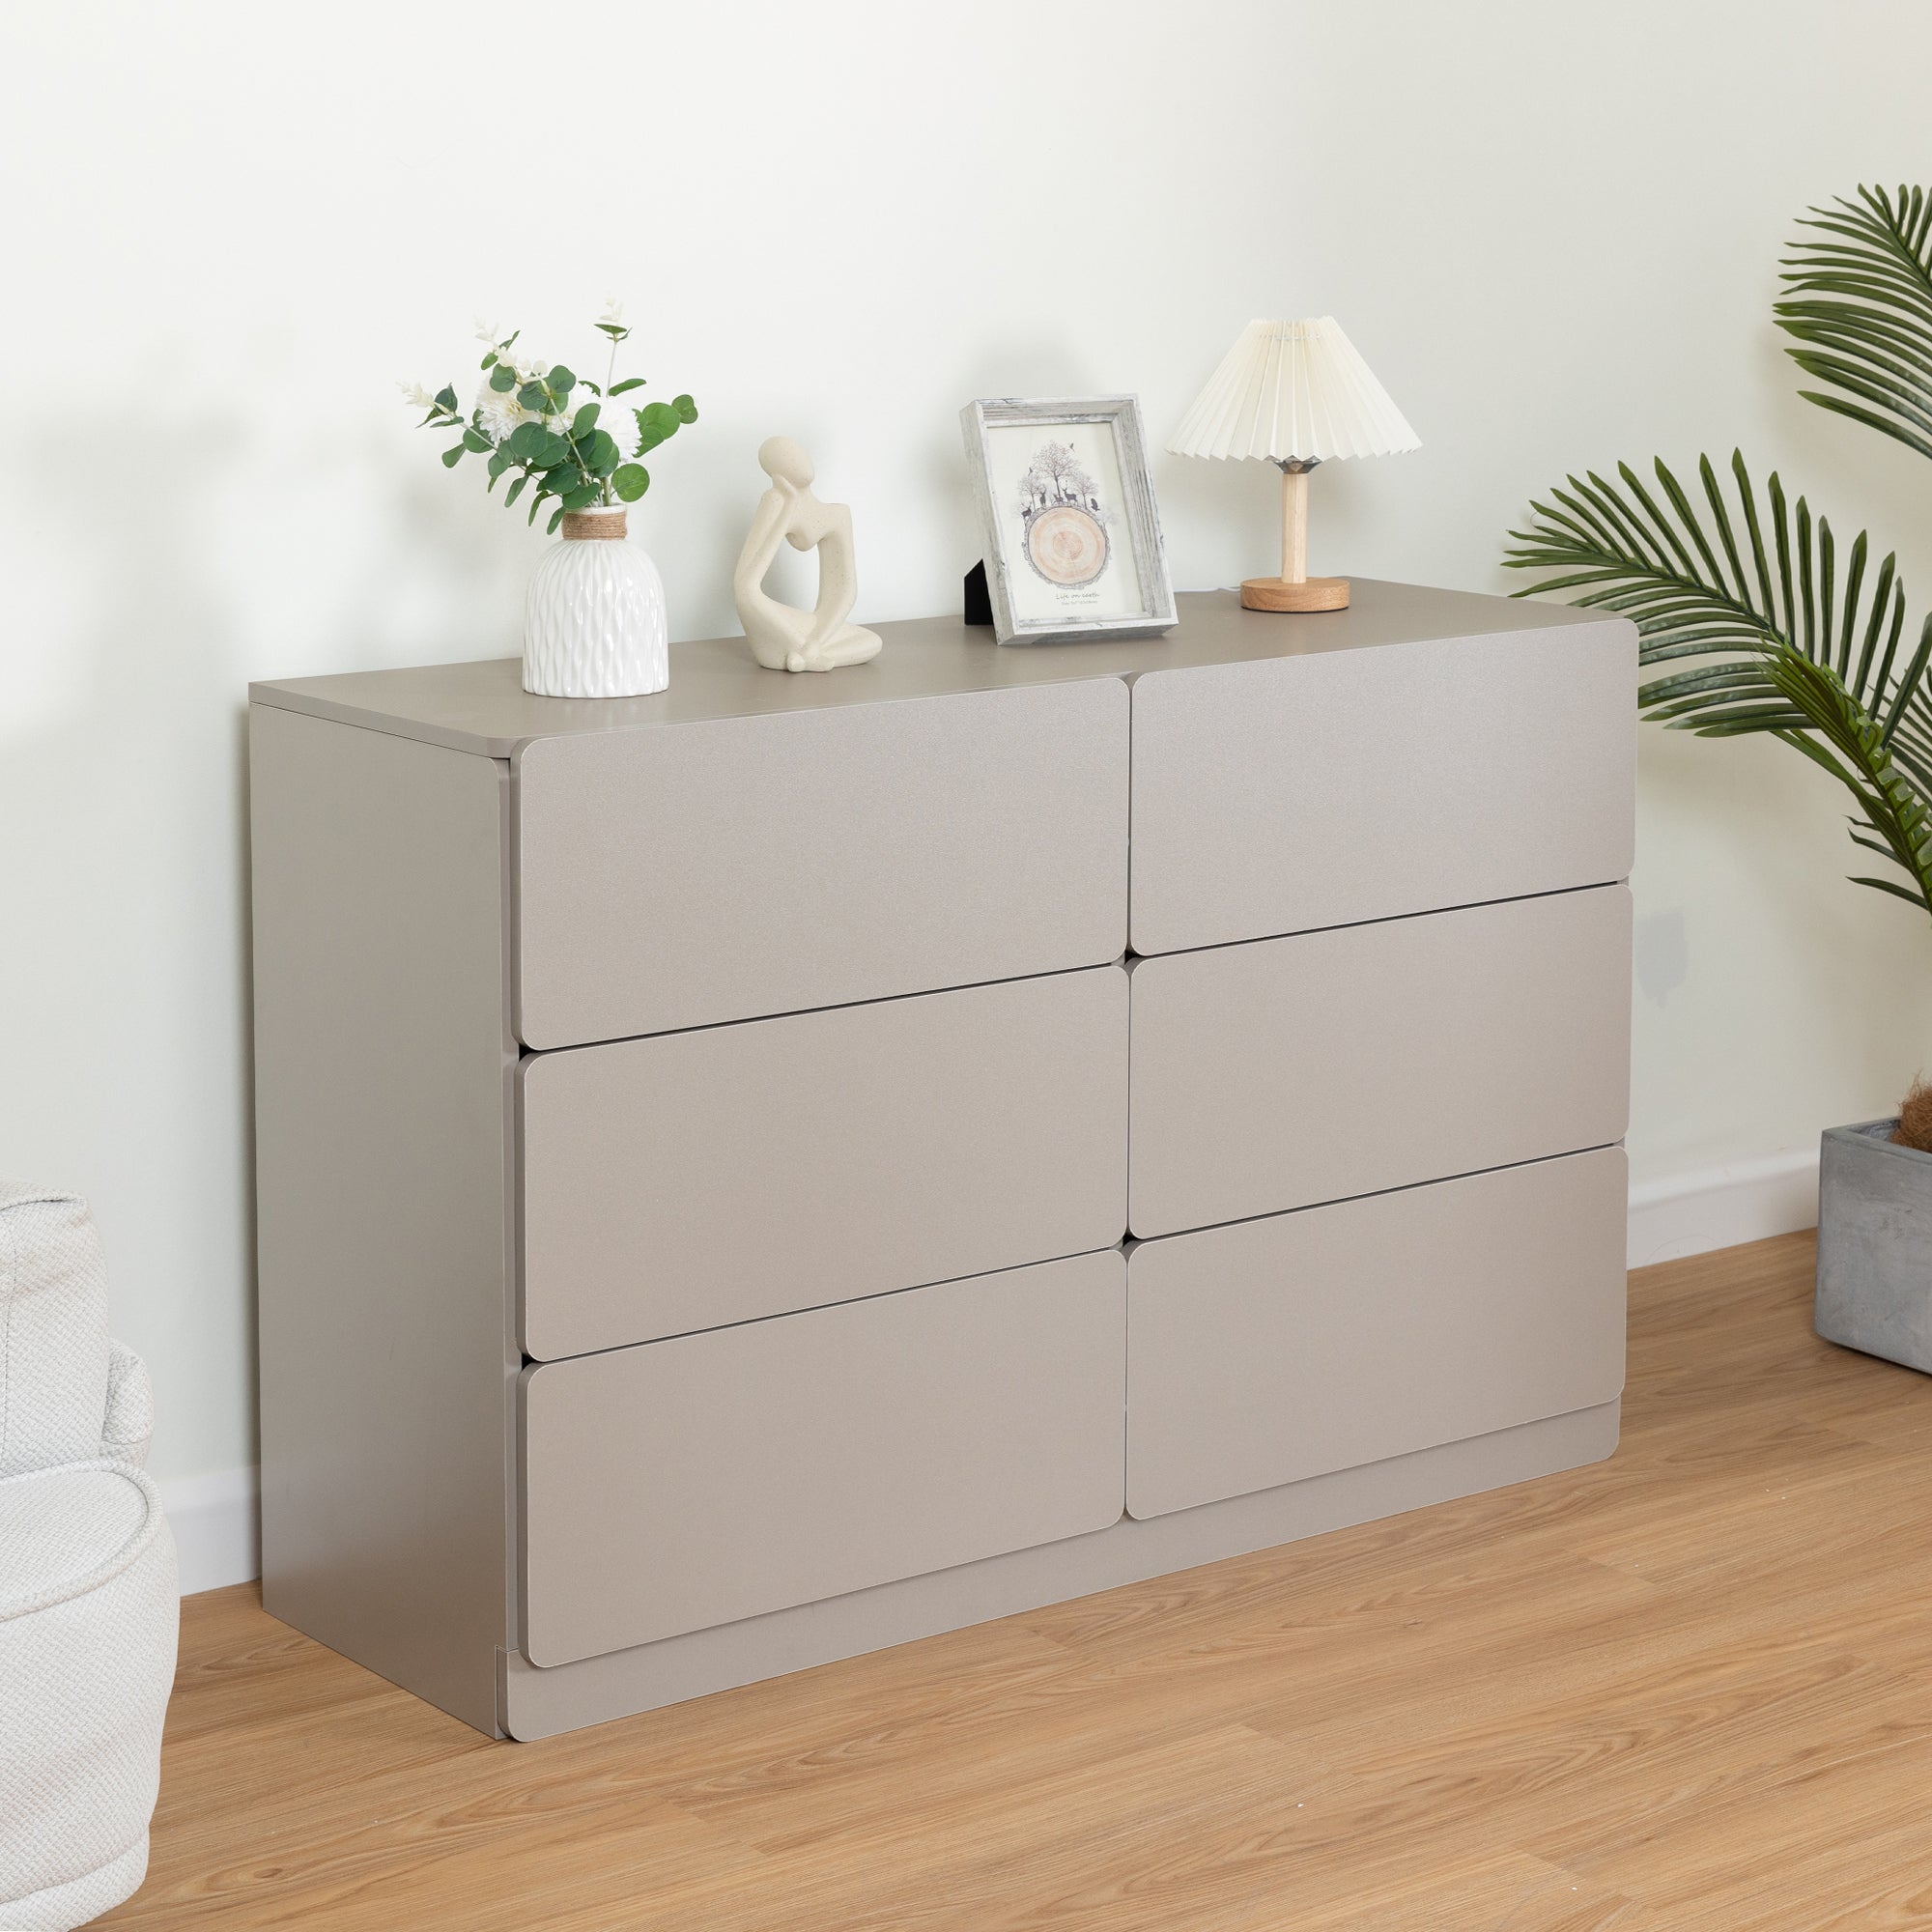 🆓🚛 Drawer Dresser Cabinet, Sideboard, Bar Cabinet, Buffet Server Console, Table Storge Cabinets, Flat Out The Corners of The Drawers, Six Drawers, for Dining Room, Living Room, Bedroom, Kitchen Hallway, Light Gray